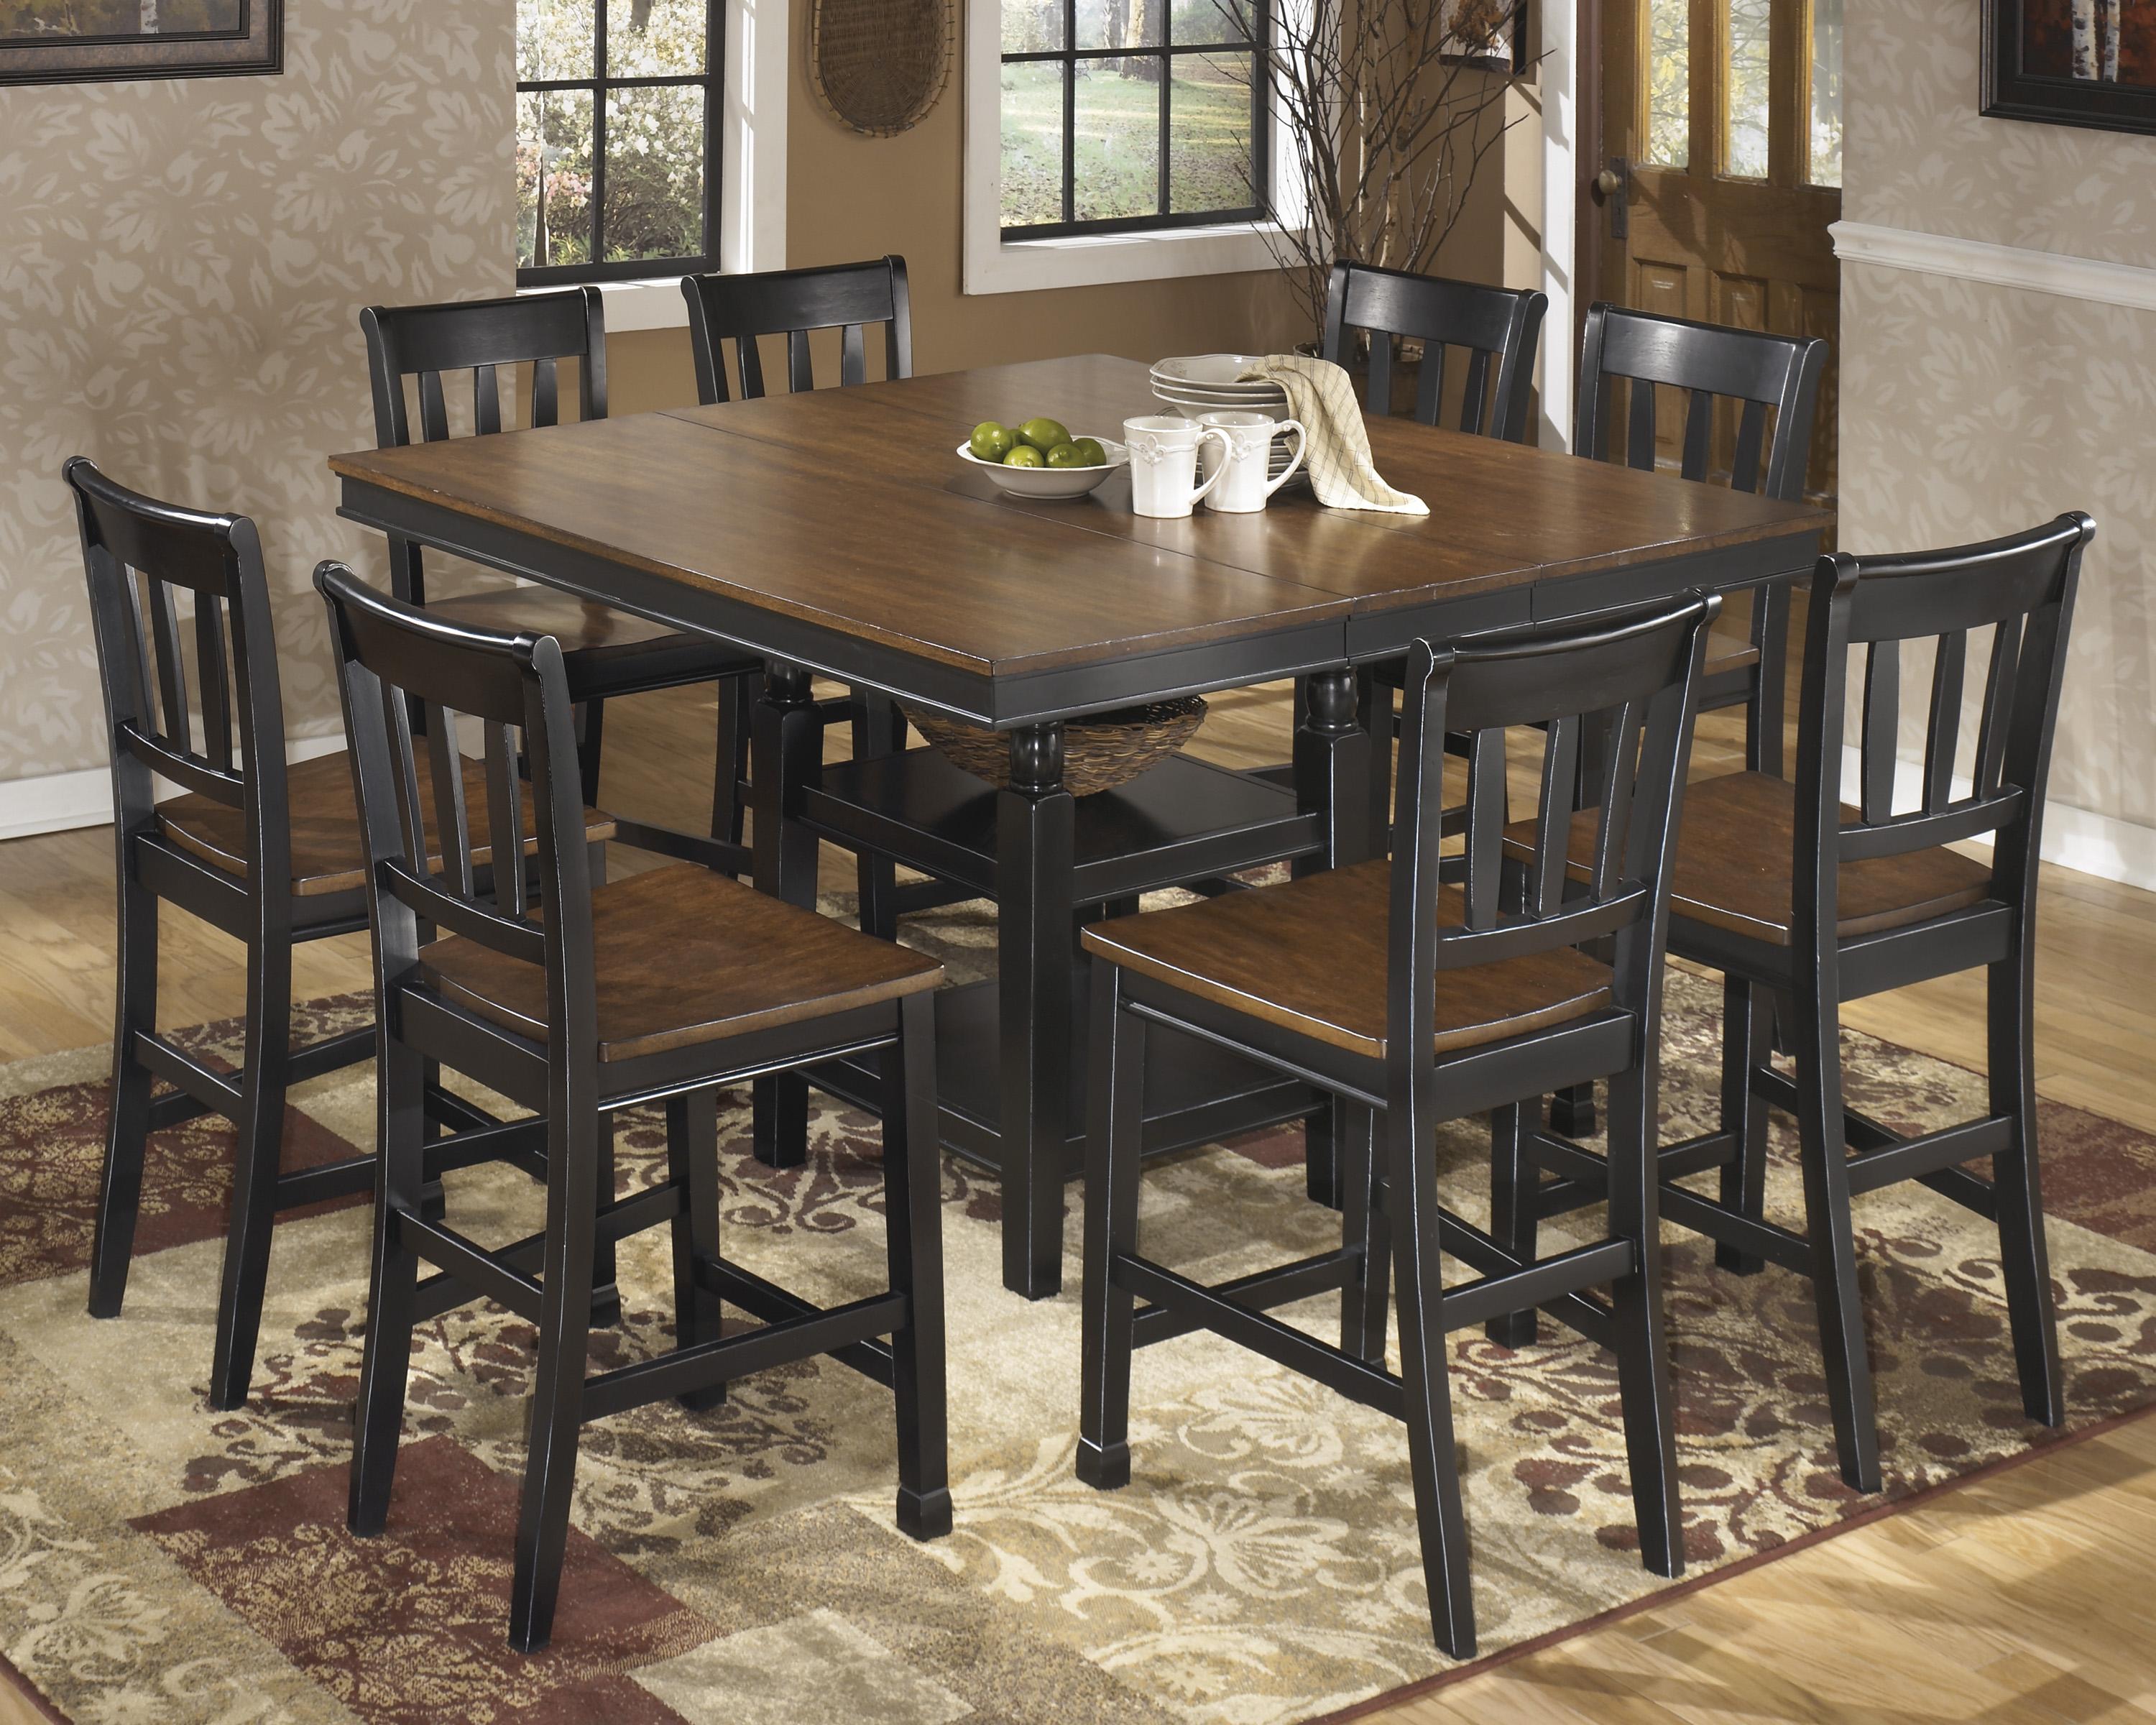 

    
Ashley Owingsville D580 Dining Room Set 10pcs in Black/Brown Square Table
